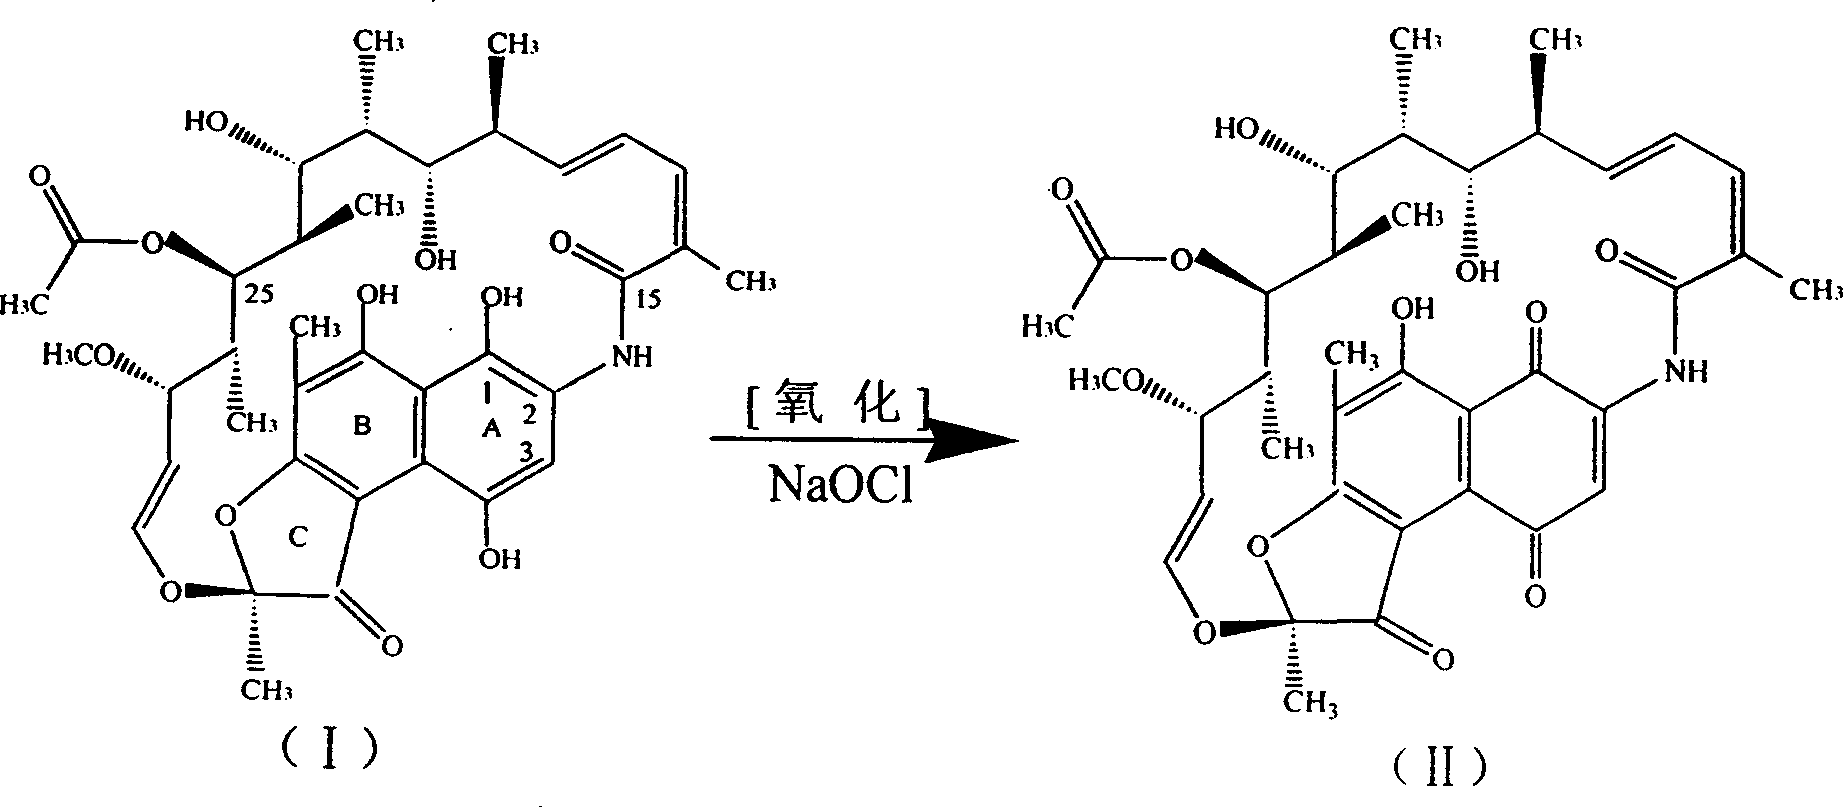 One-pot processing method for synthesizing rifampicin